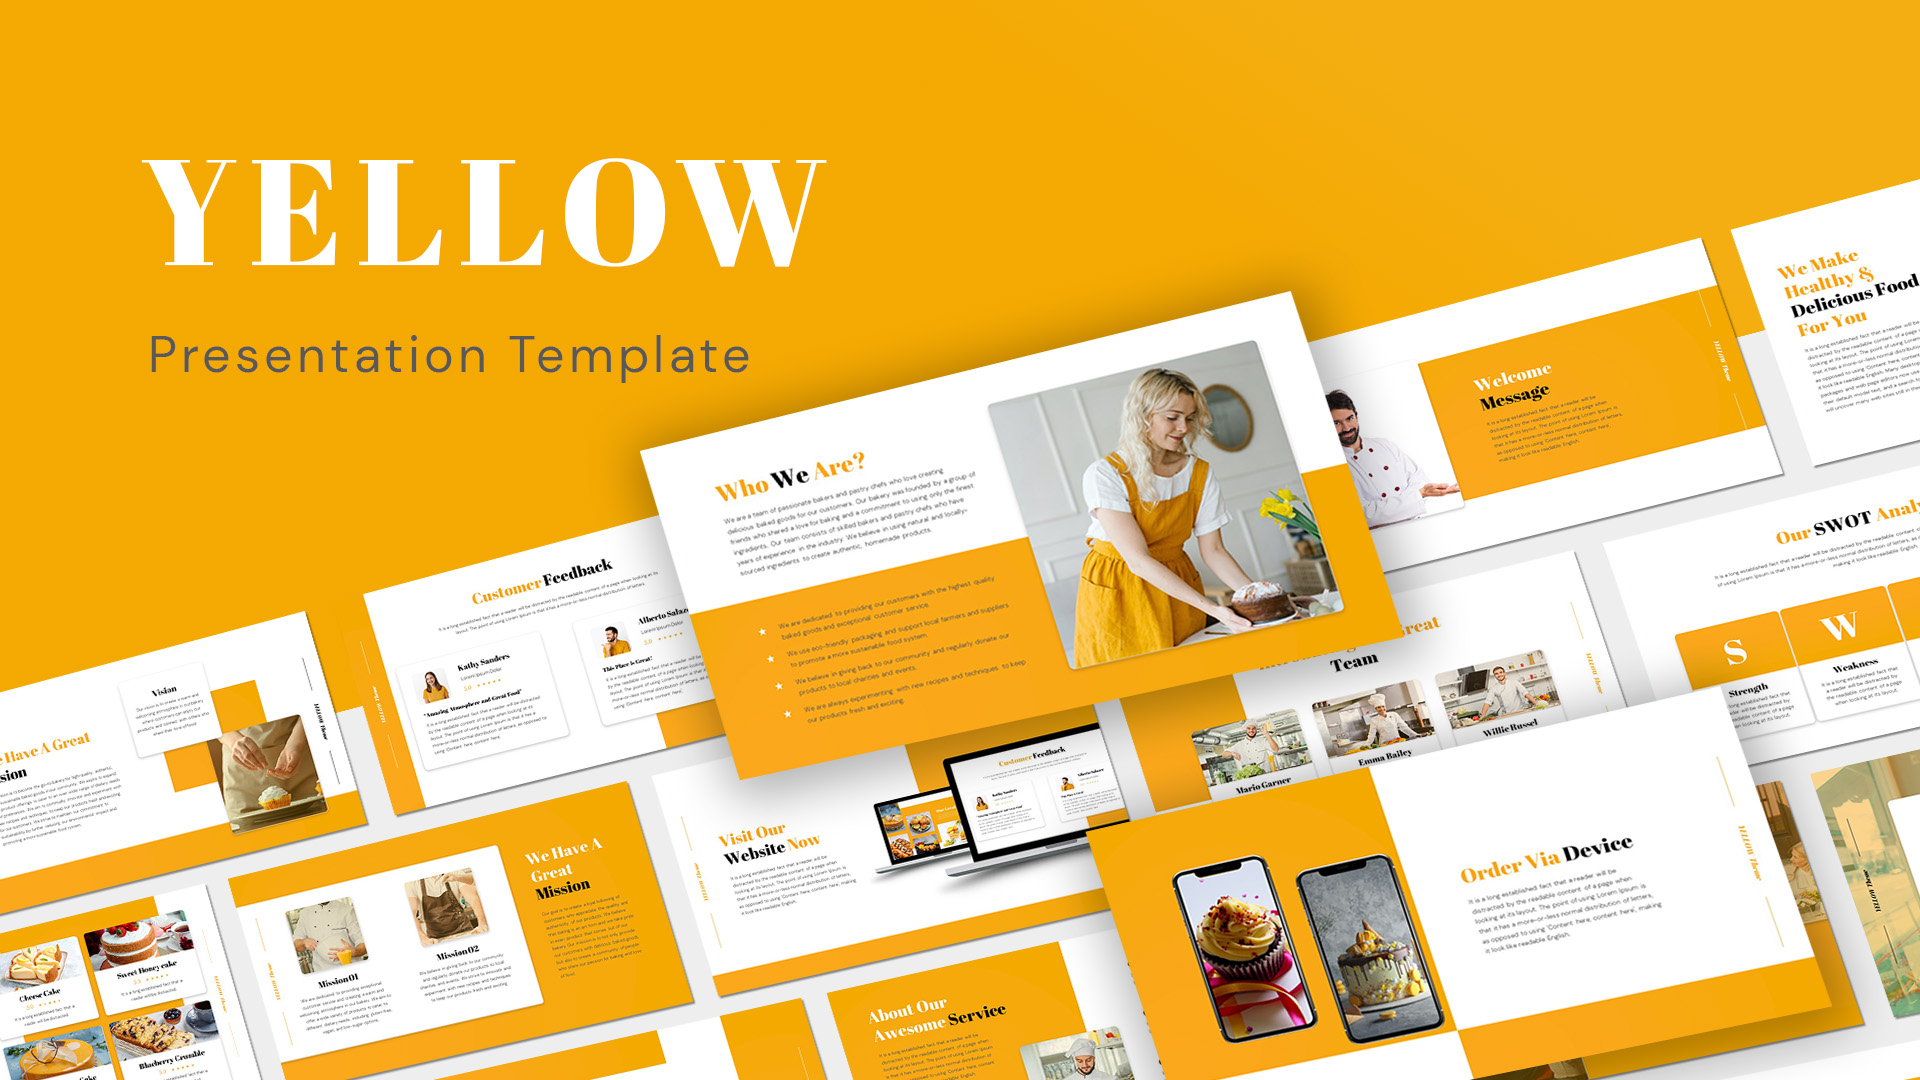 Yellow Theme Food and Beverage PowerPoint Presentation Template